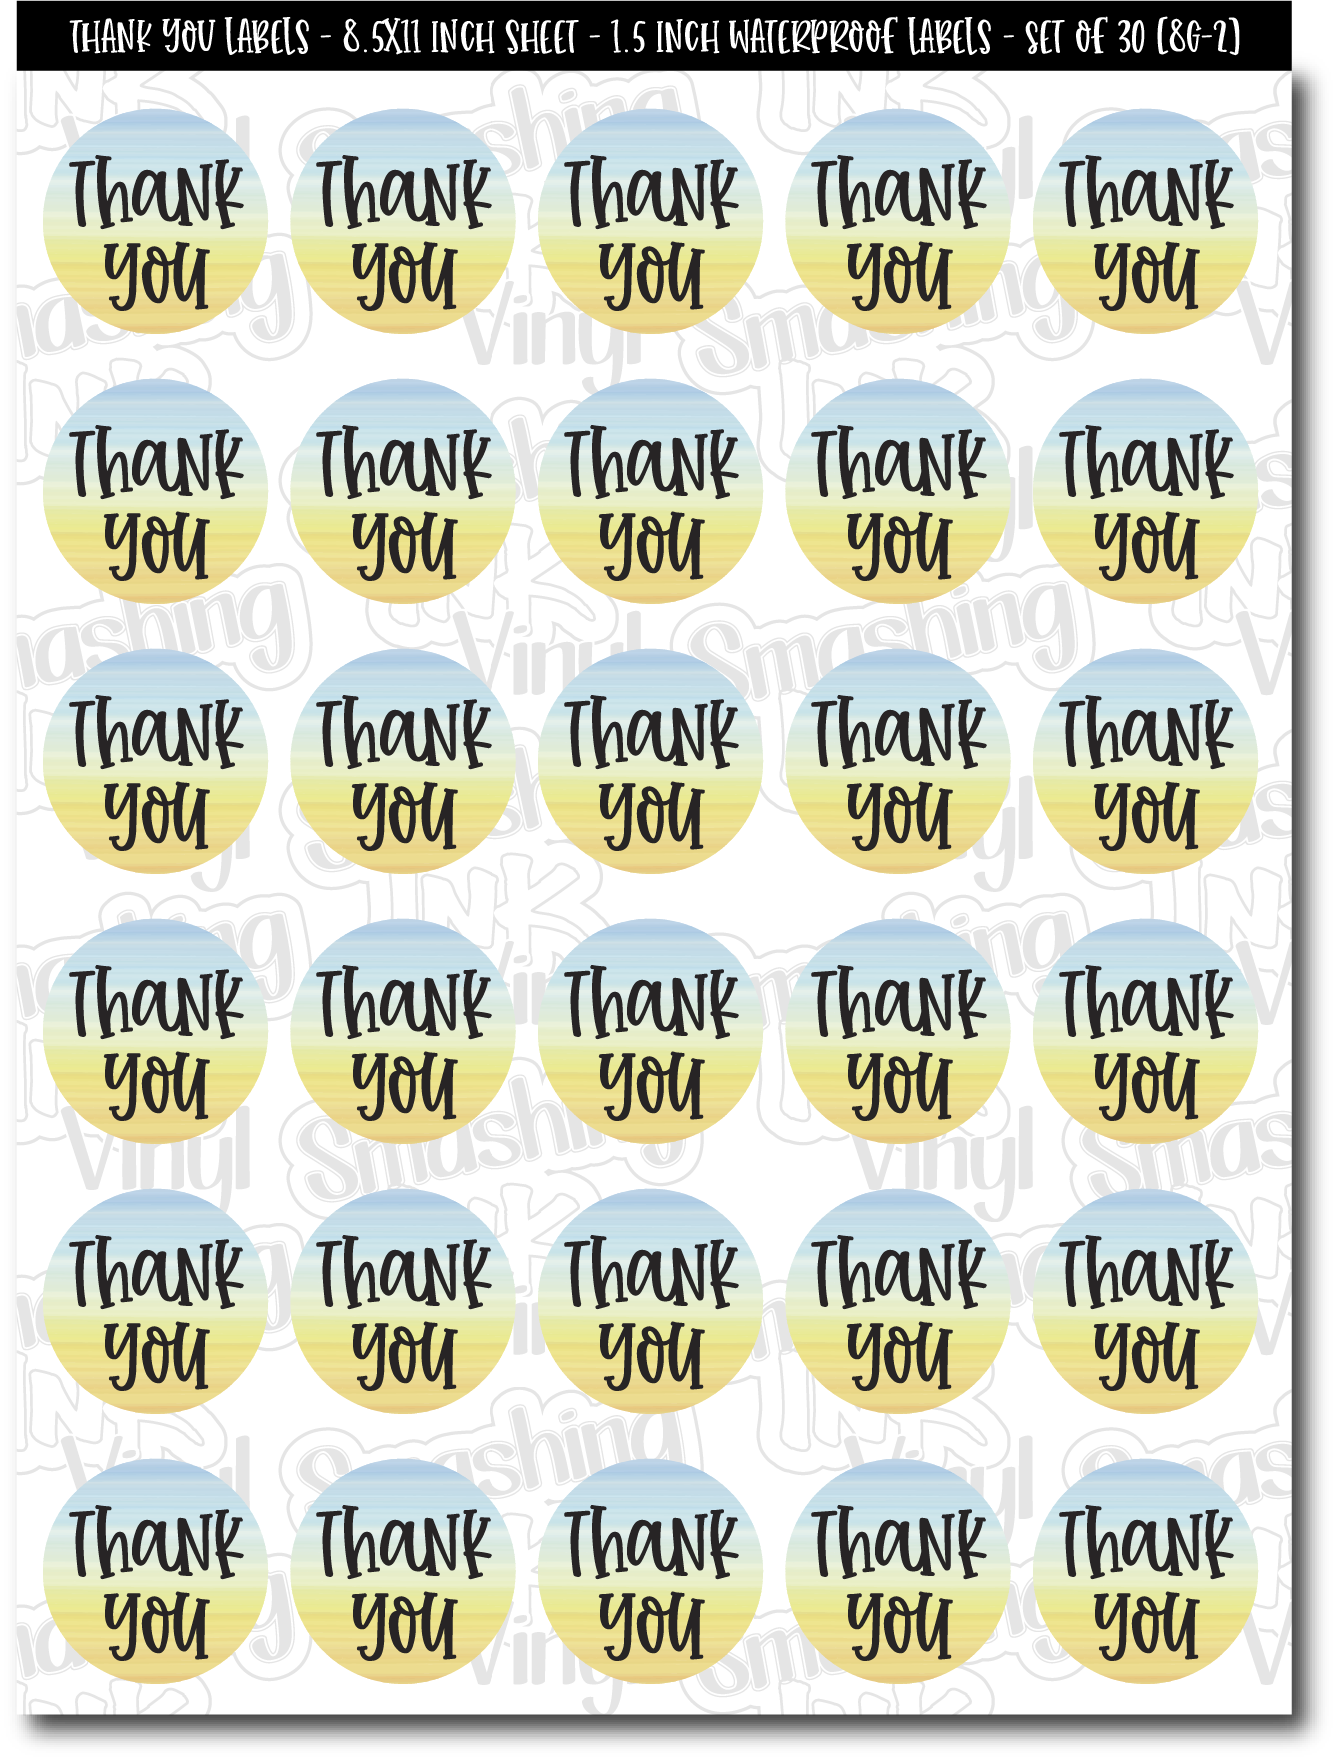 Striped Thank You - Packaging Labels (SHIPS IN 3-7 BUS DAYS)